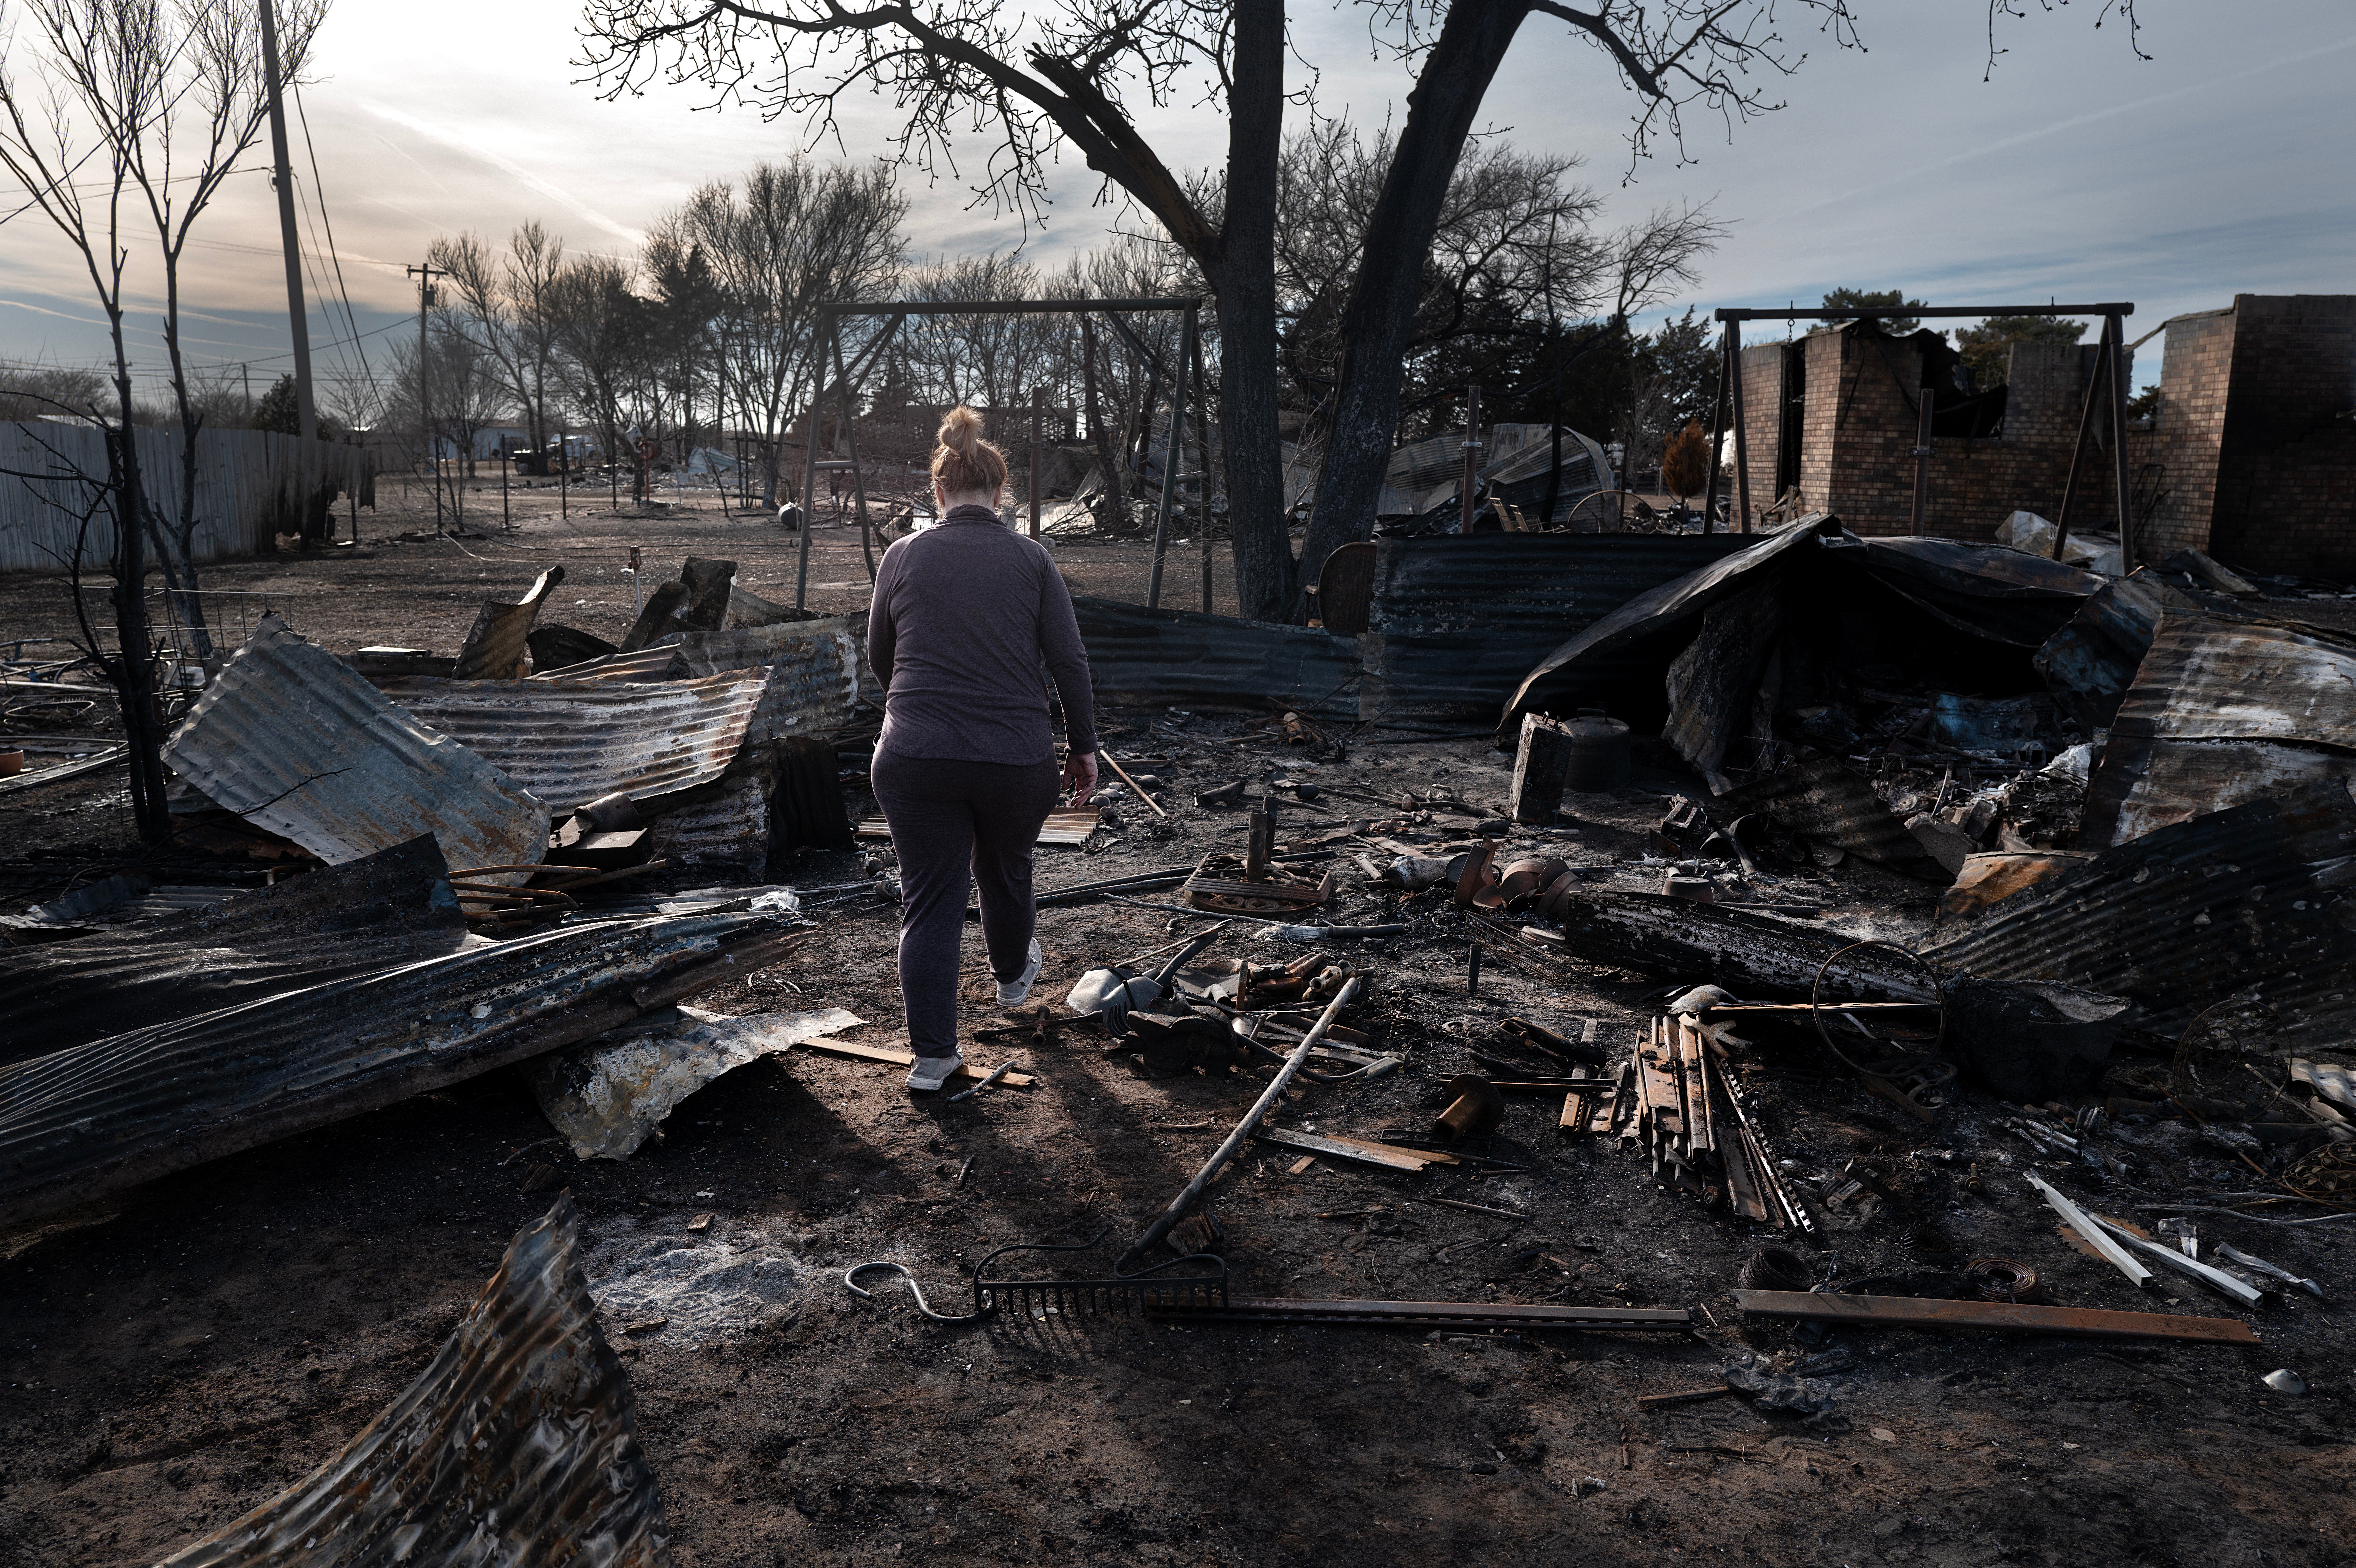 The wildfires in Texas have devastated homes in the Panhandle